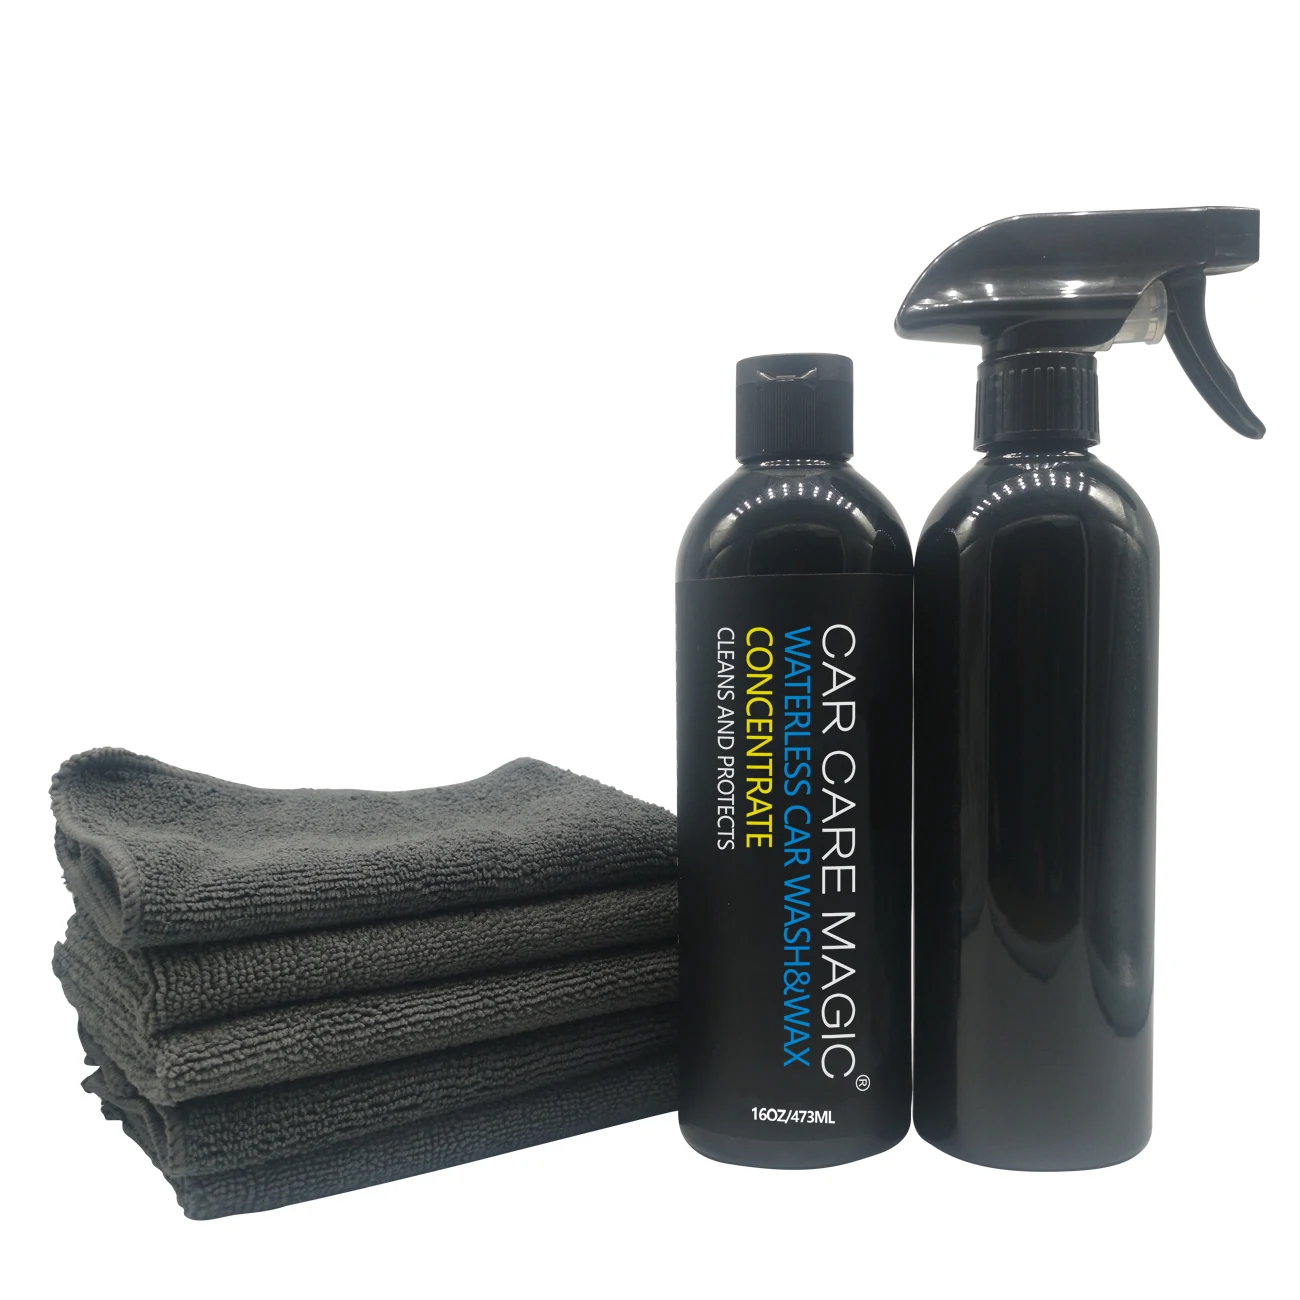 private label waterless car wash kit concentrate factory (62195278104)